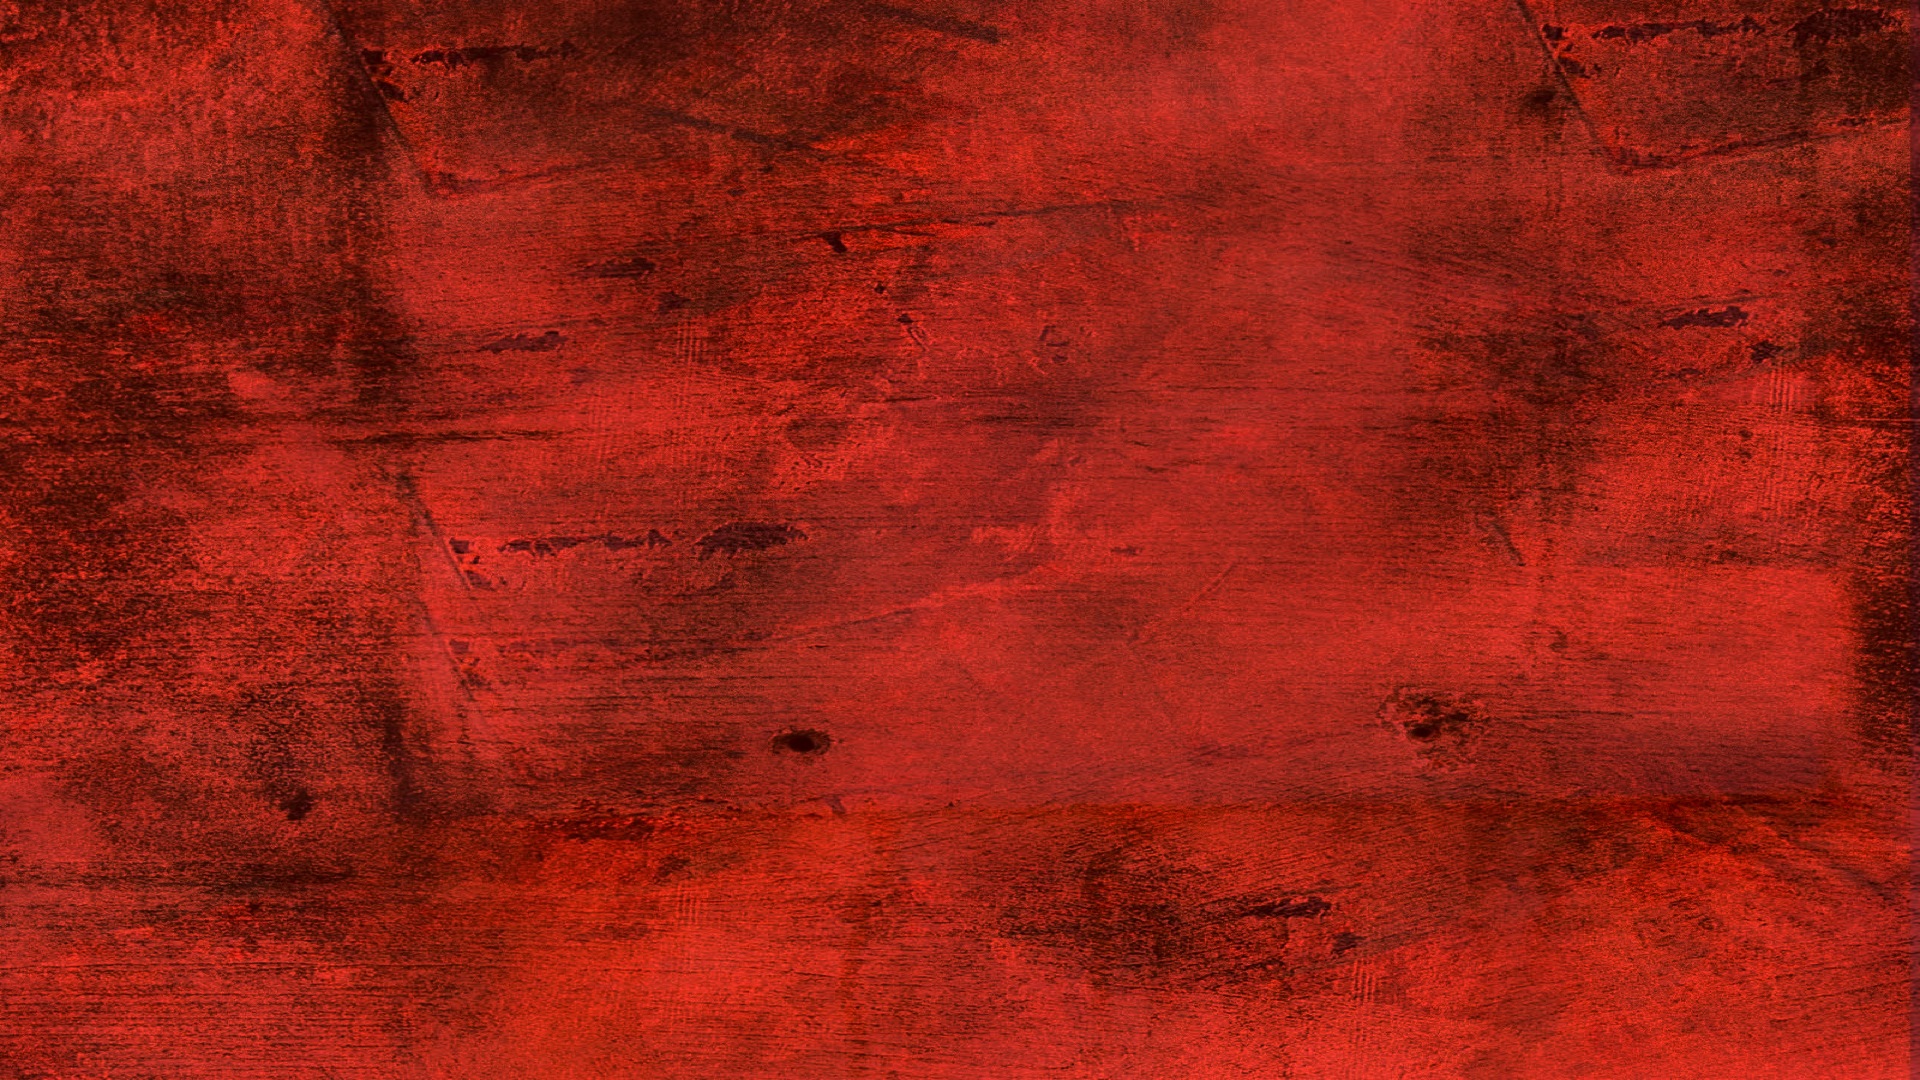 Red Texture Background Textured Image